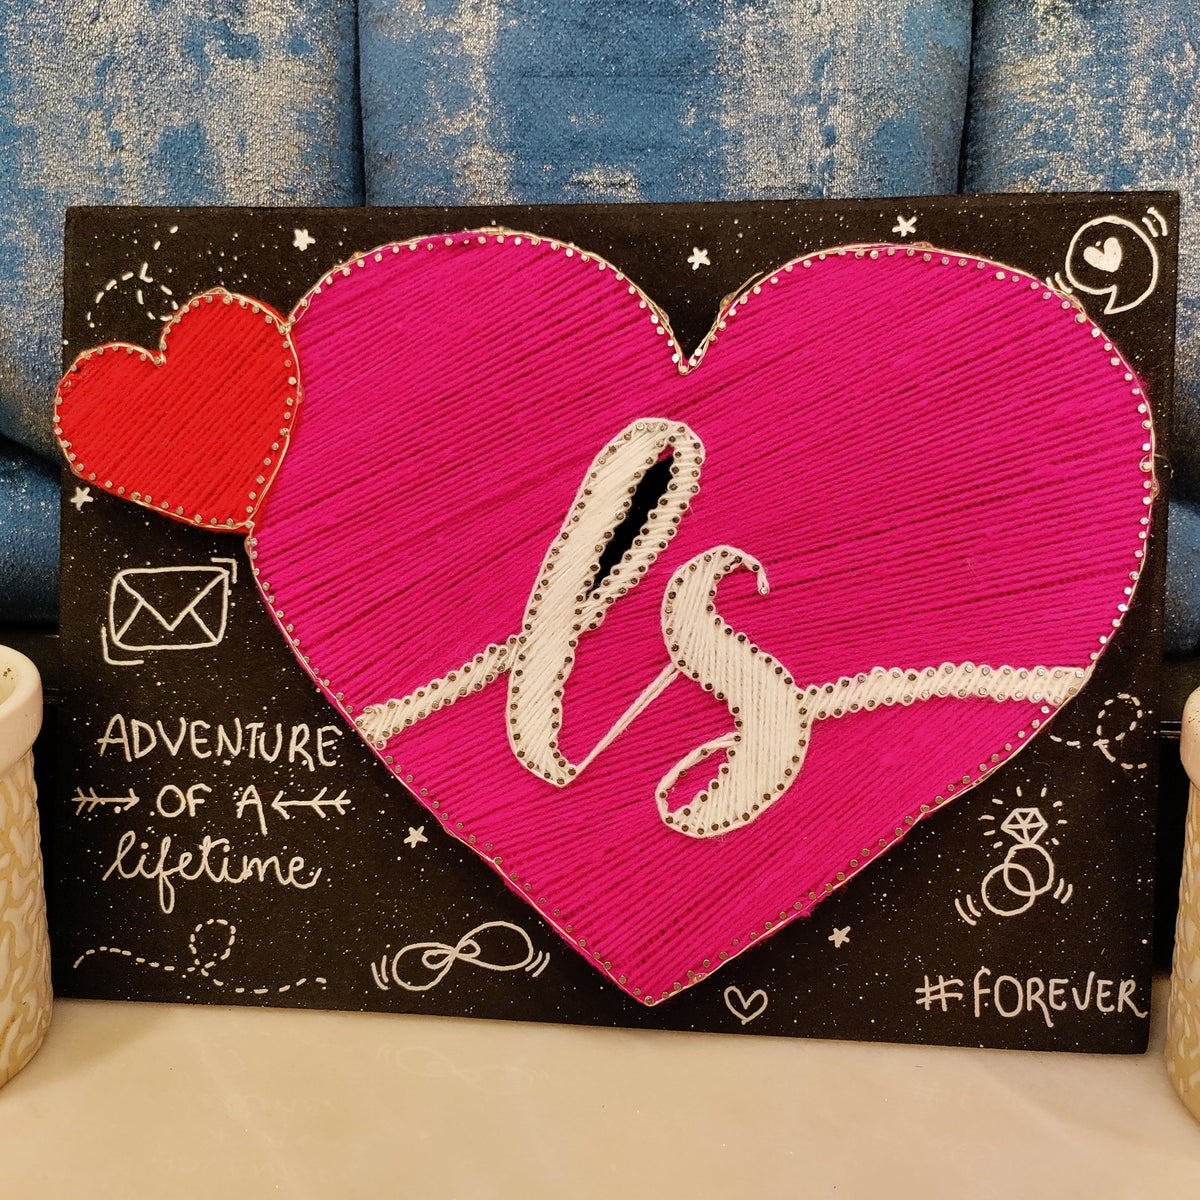 Adventures with Hearts: A Lifetime of String Art